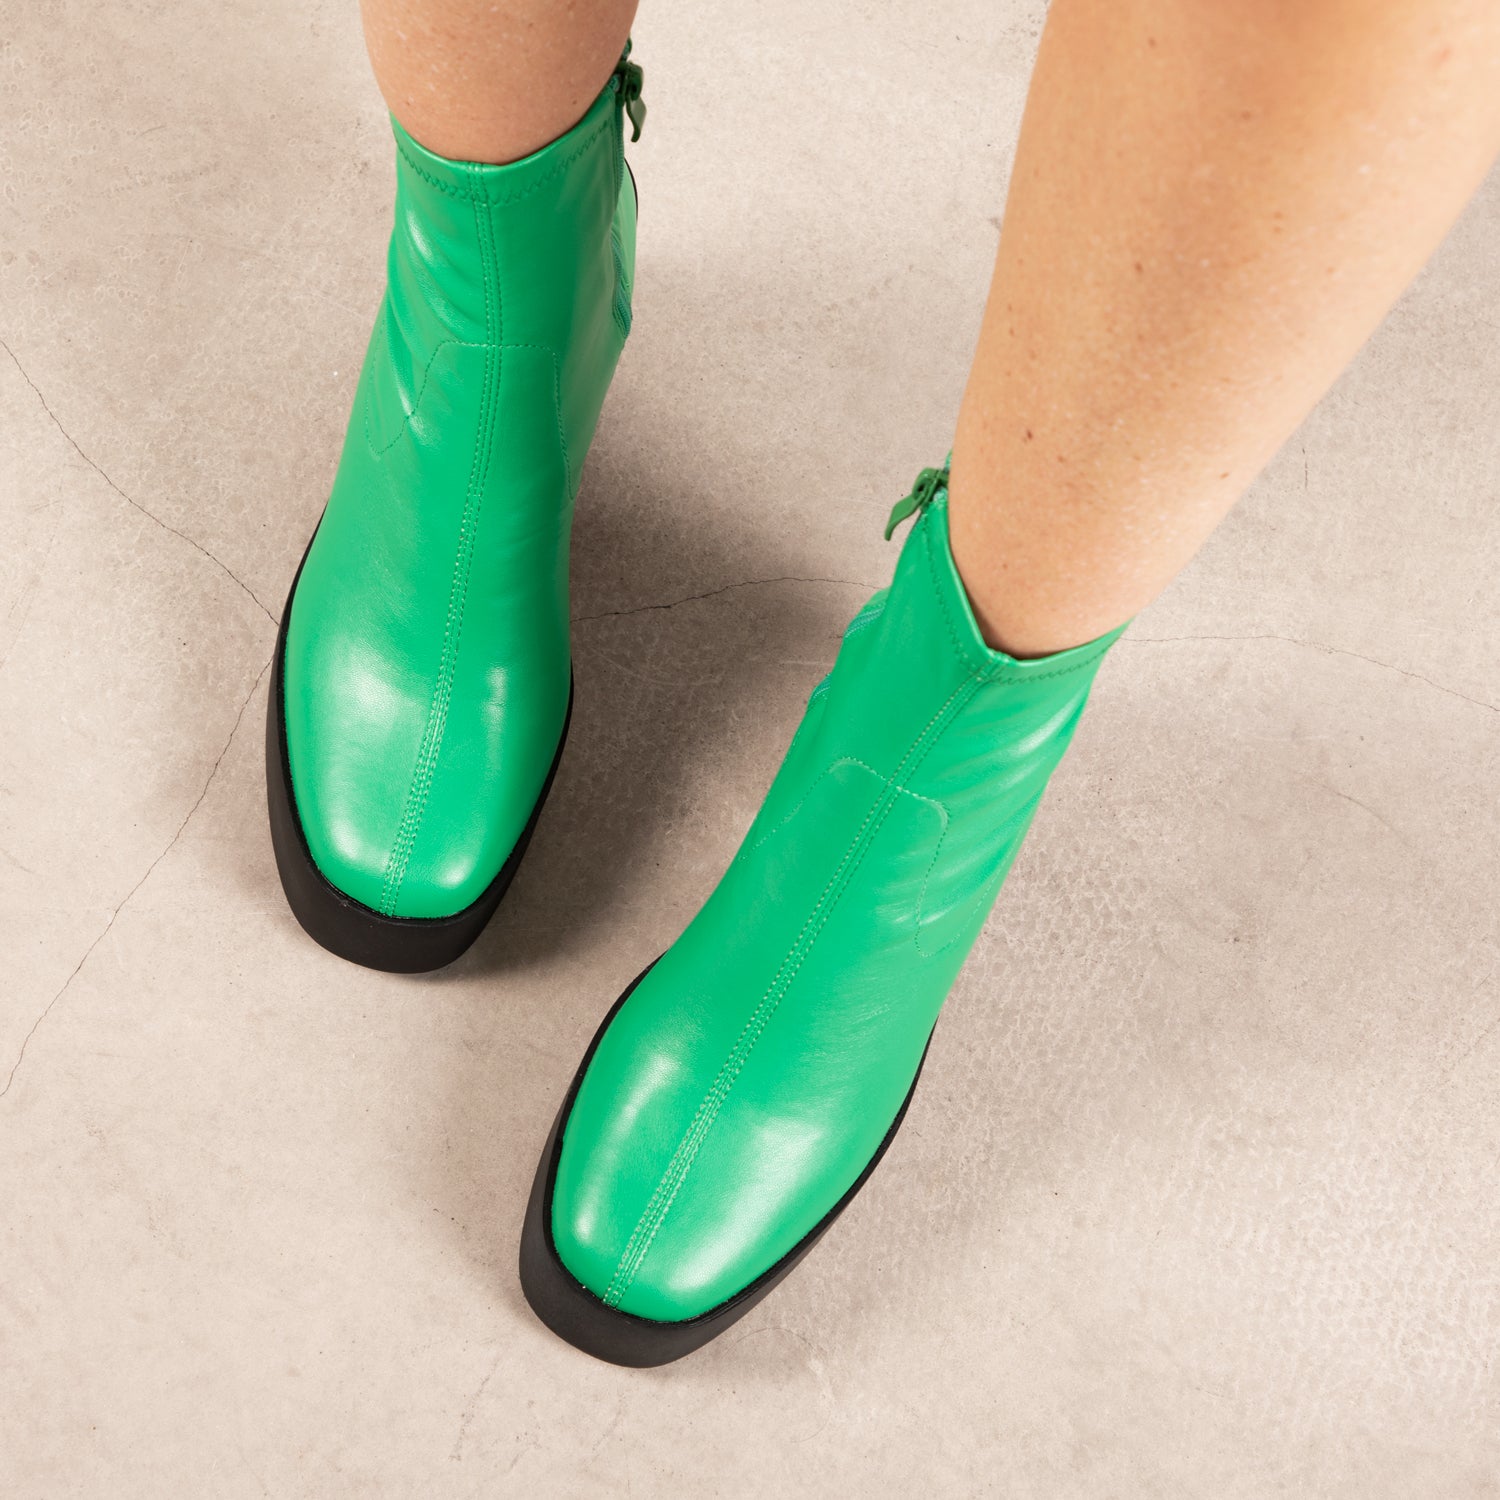 RAID Beena Platform Ankle Boot in Green